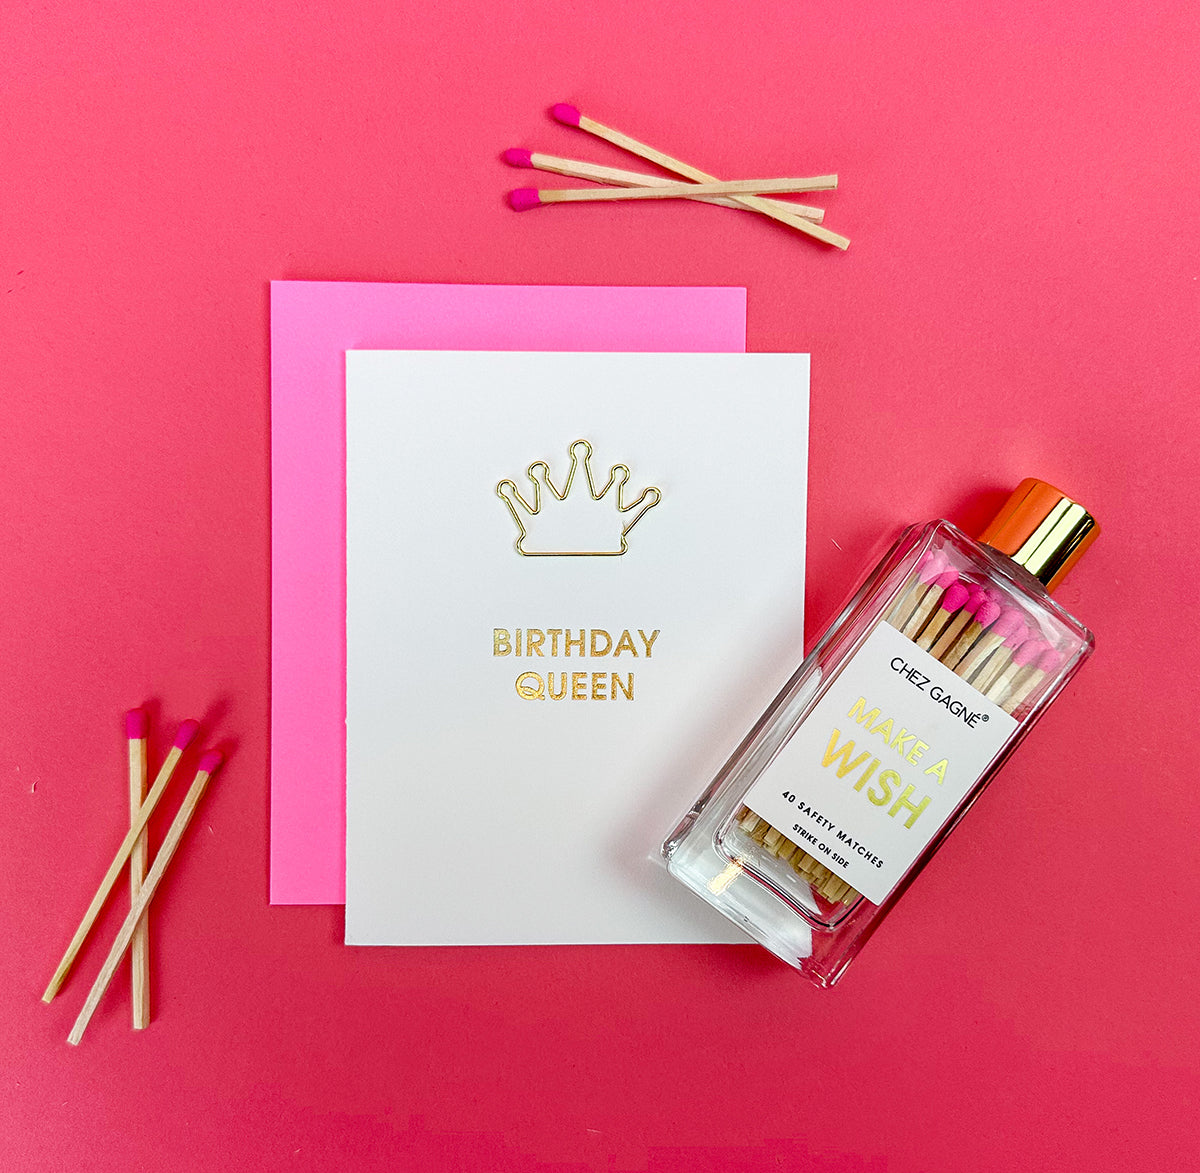 Make A Wish - Glass Bottle Safety Matches (Hot Pink)